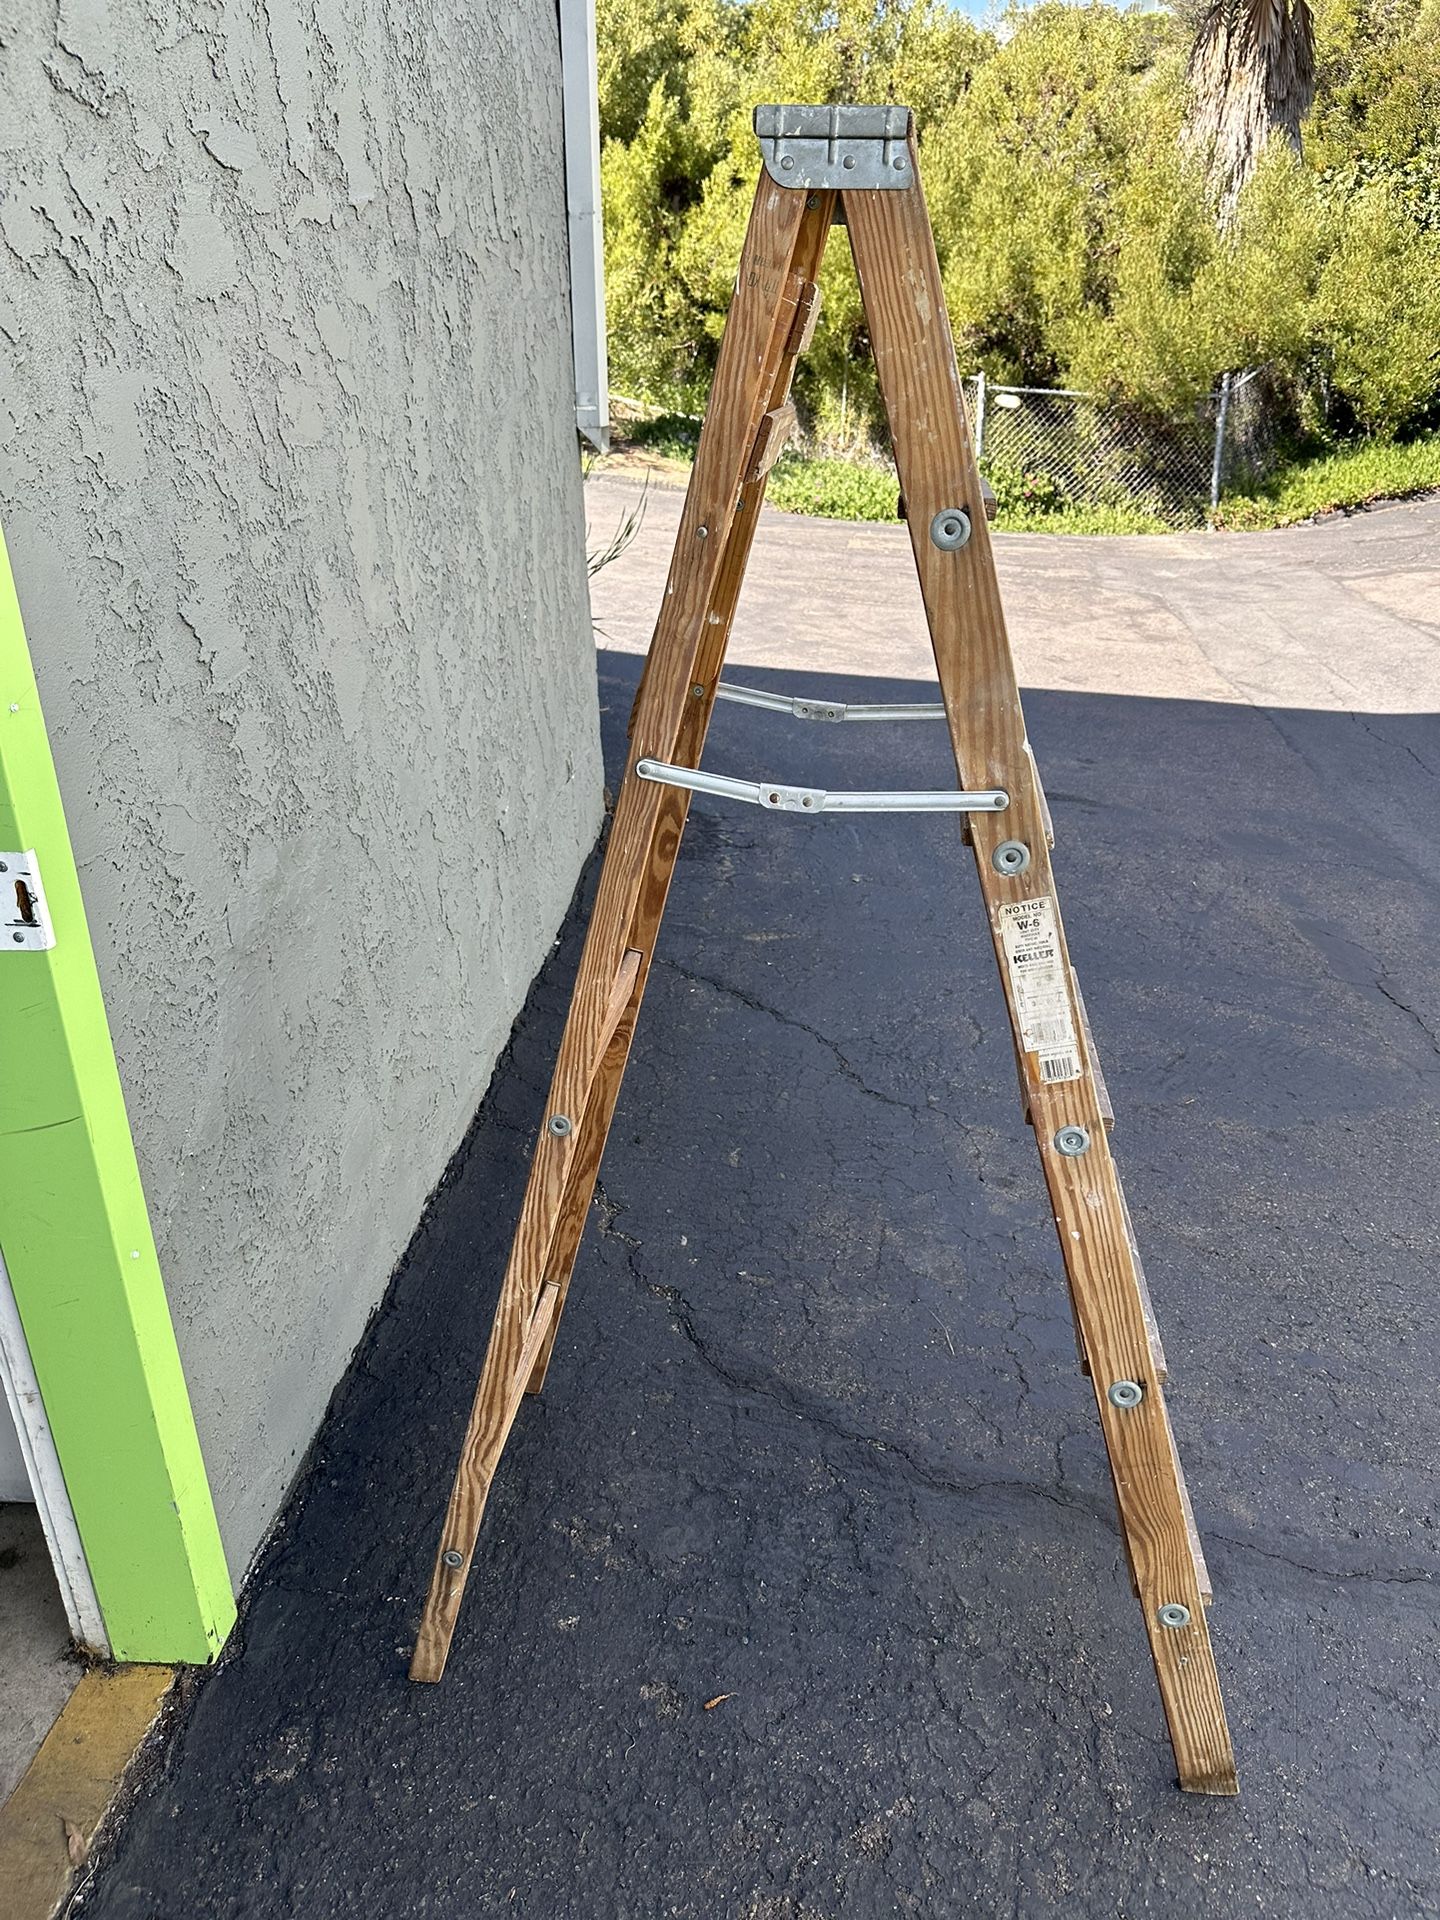 personal ladder